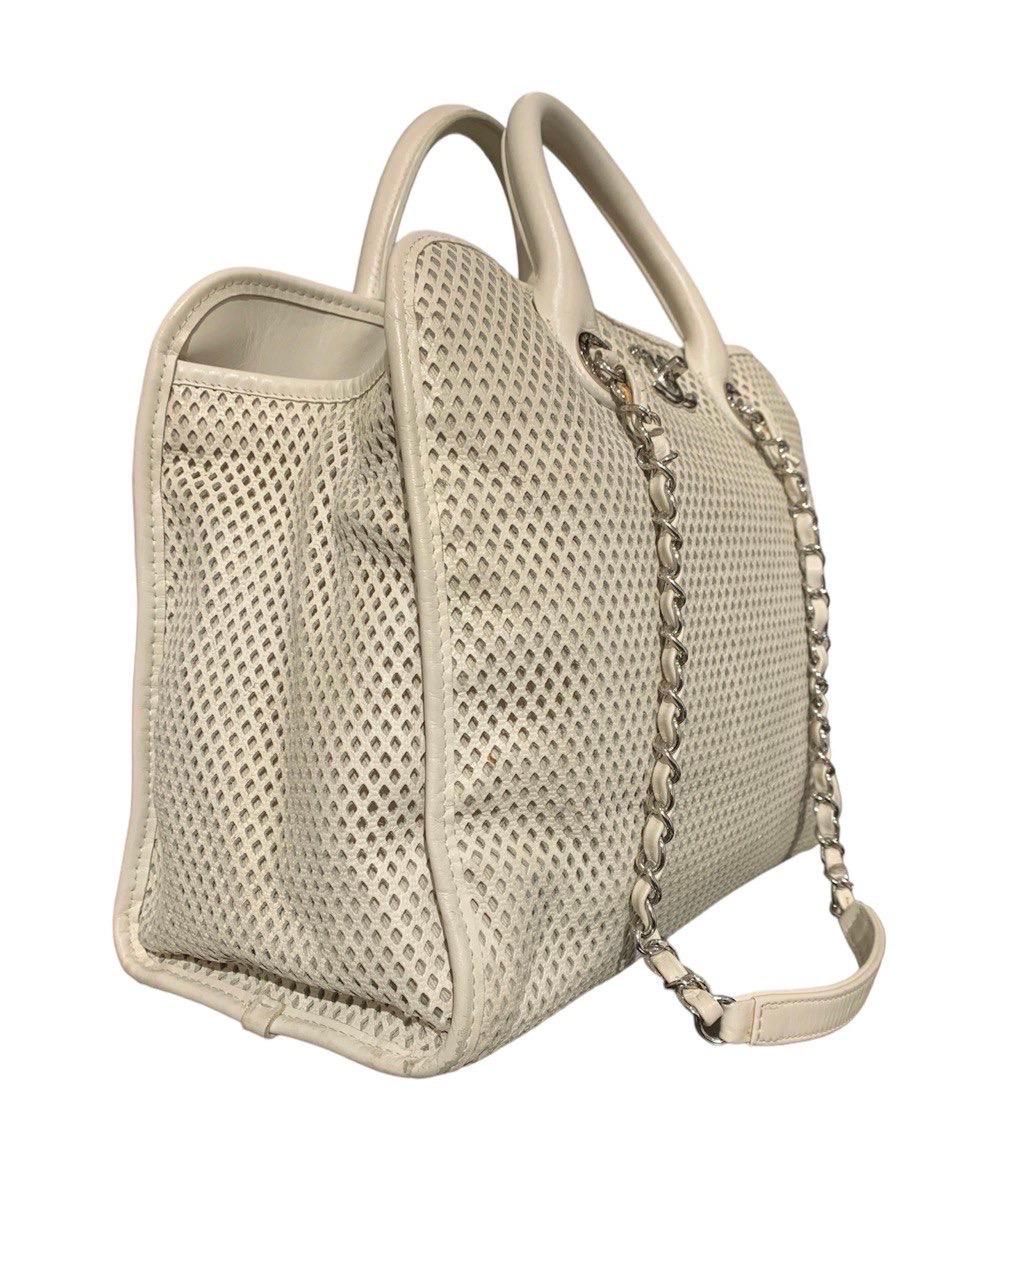 Chanel White Perforated Leather Shopper Deauville Bag 3